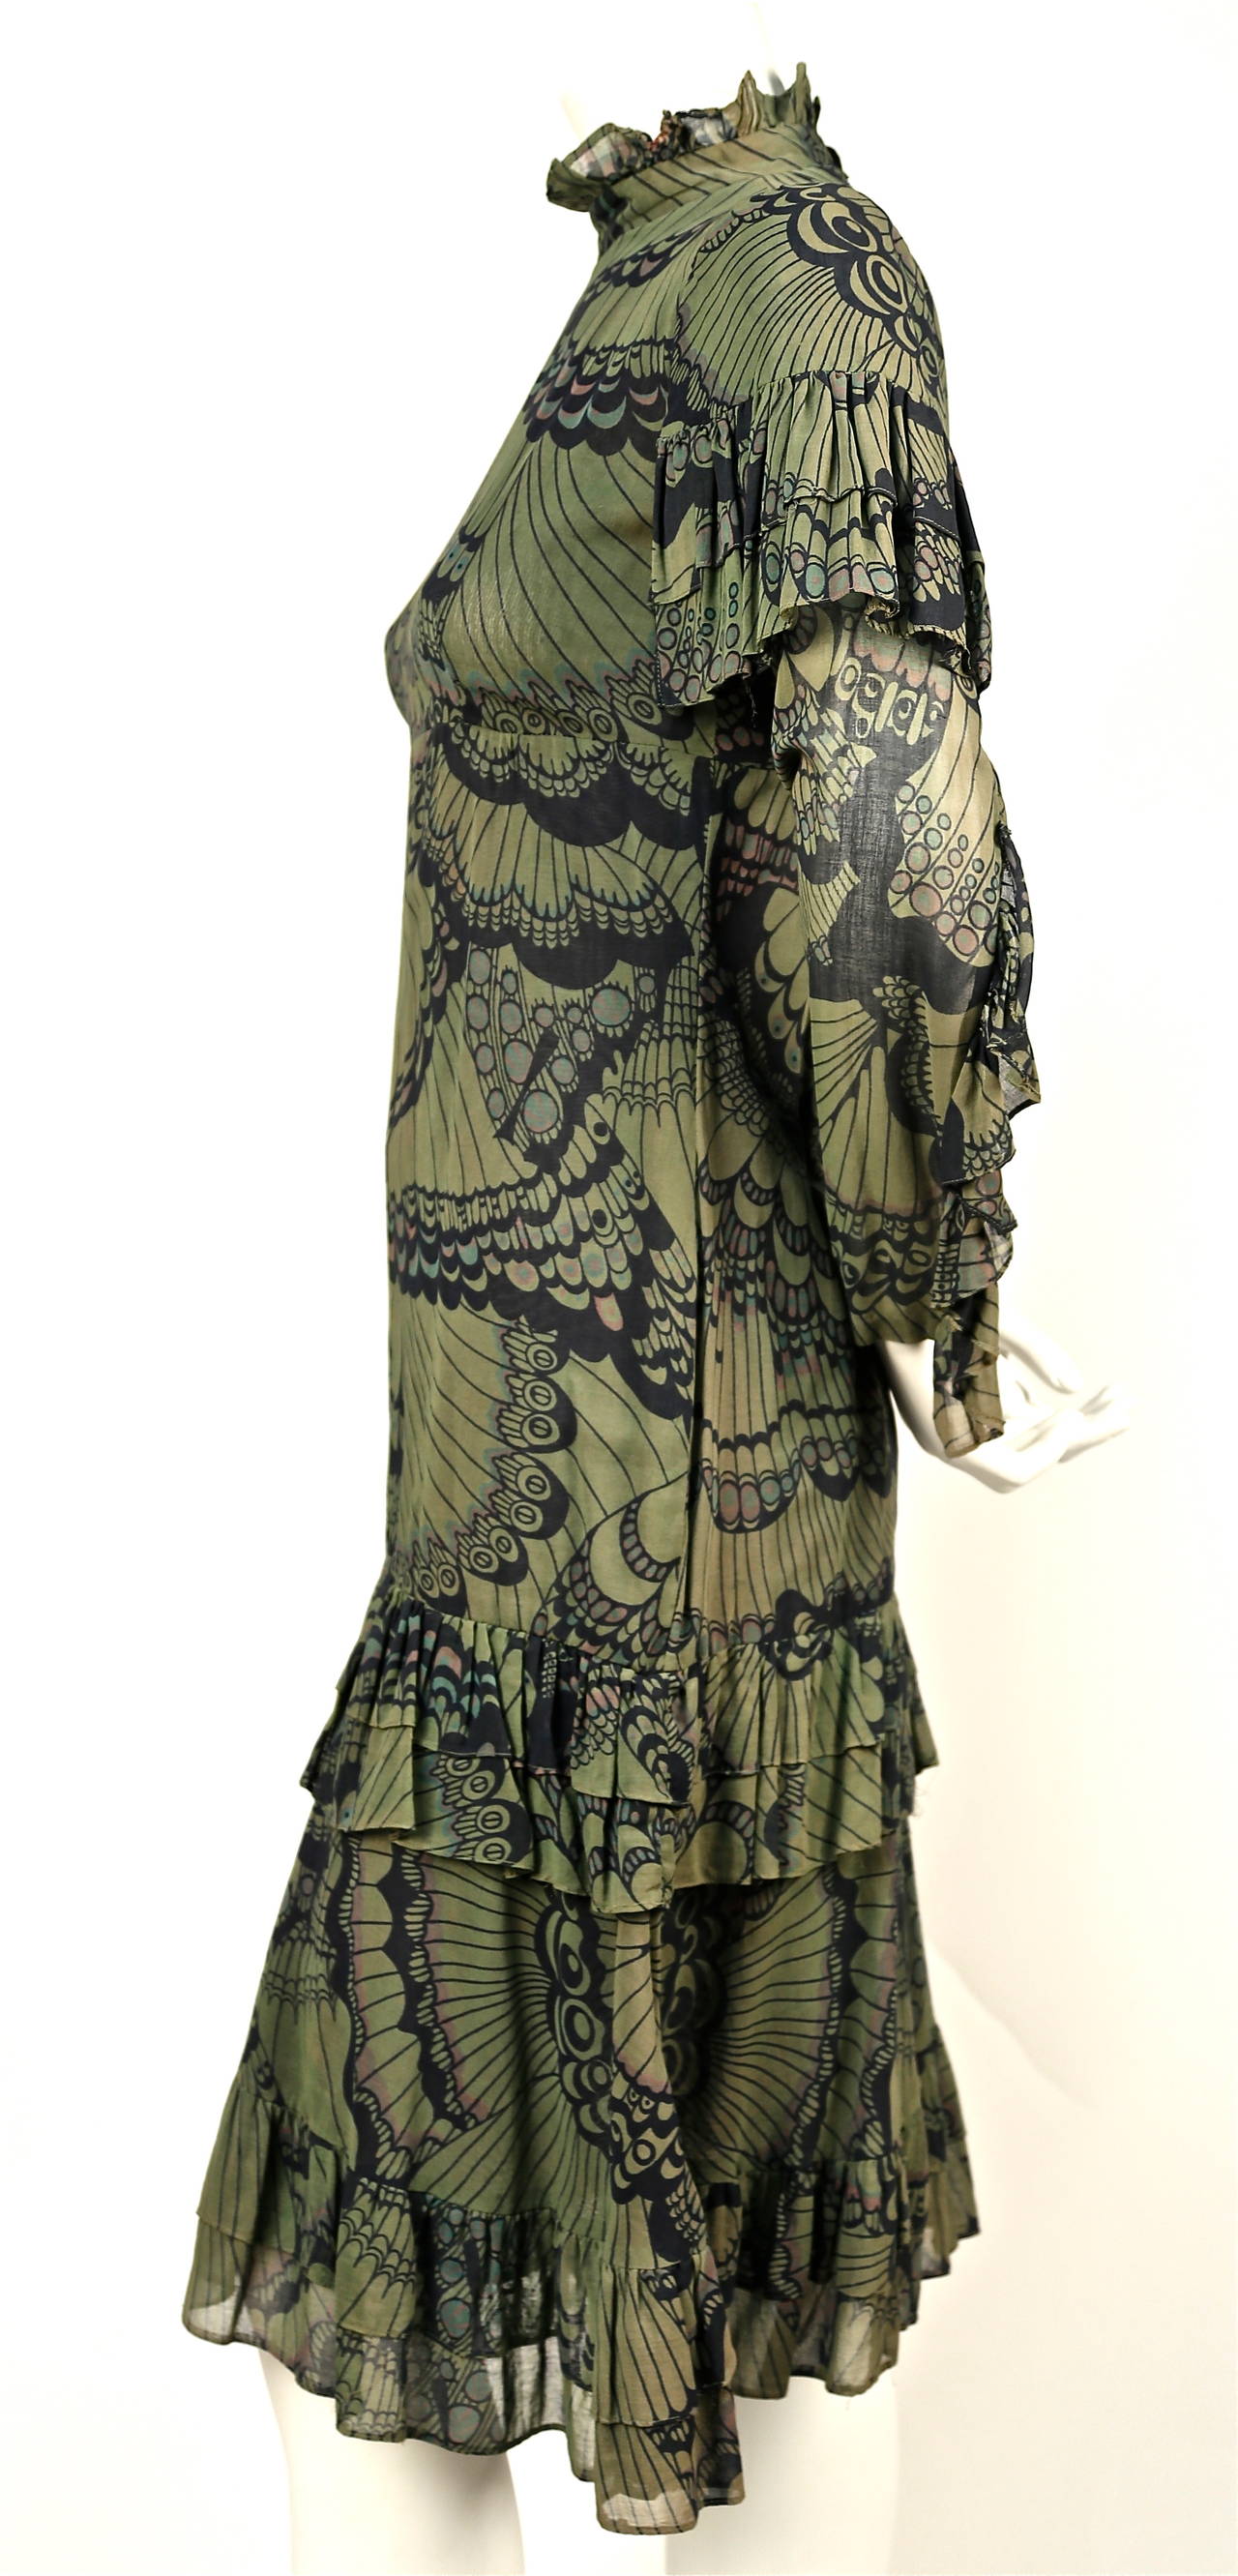 Very rare peacock feather printed cotton voile dress from Thea Porter dating to 1970. Labeled a U.K. 12 although this fits a 2 or 4 max (32